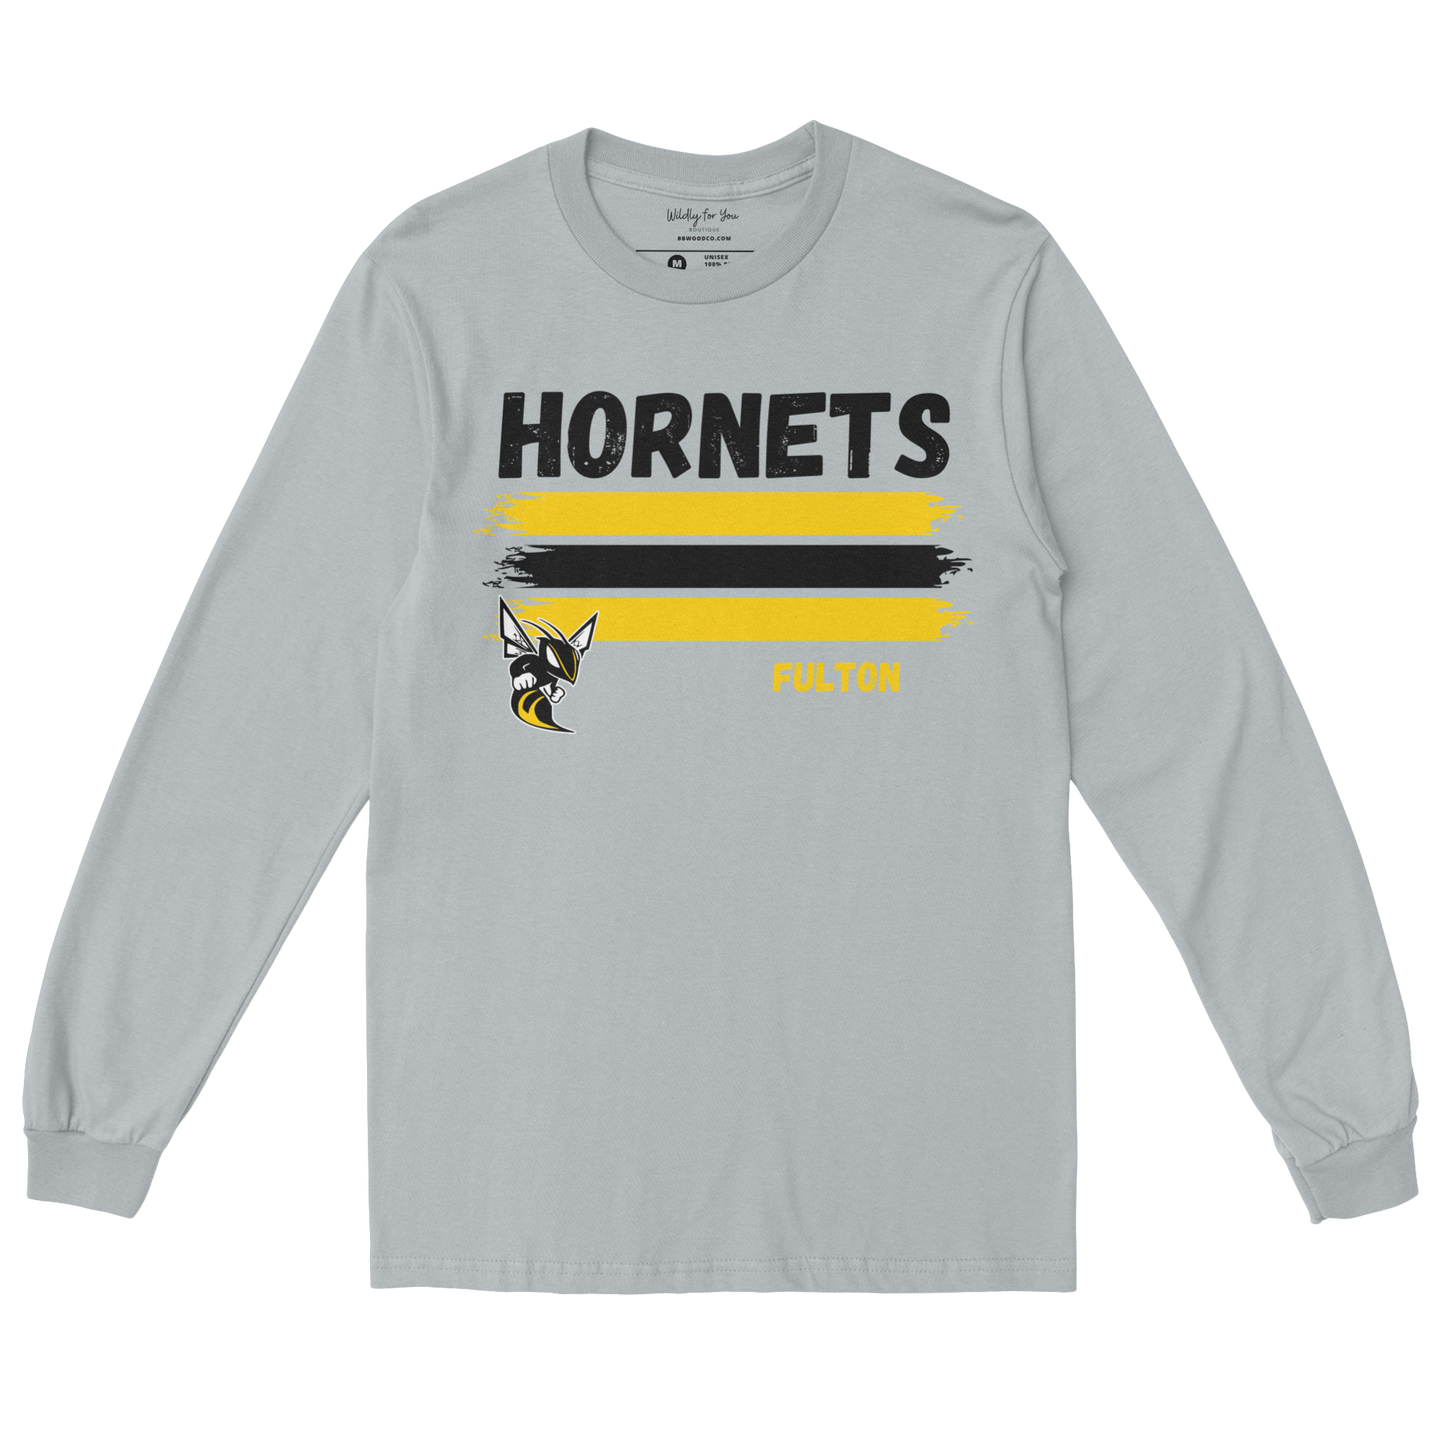 Youth Fulton Hornets